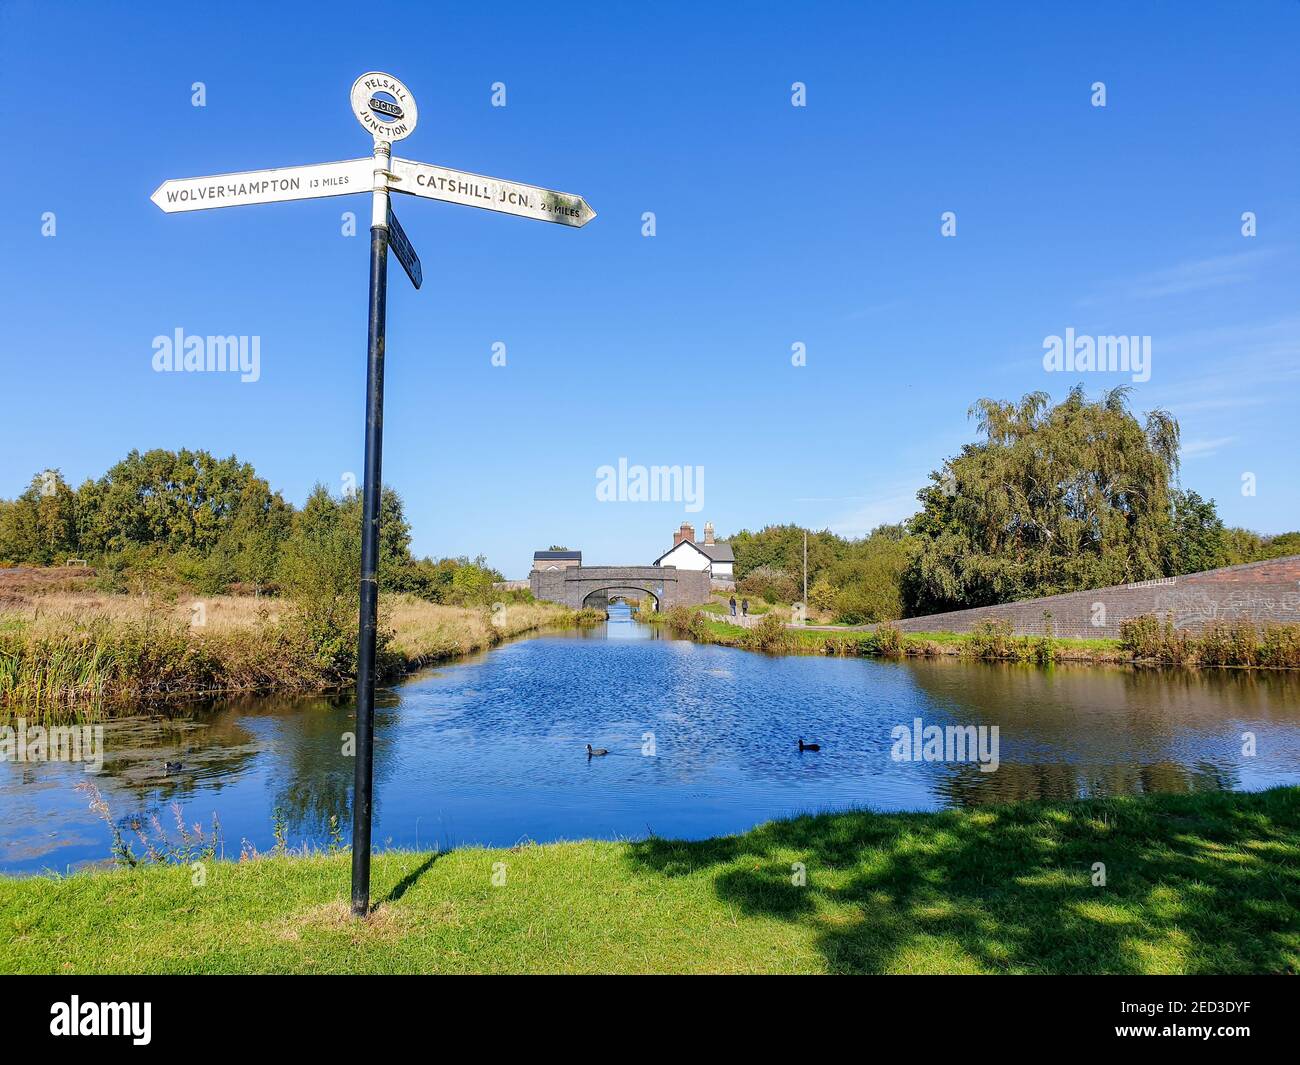 Pelsall, Walsall, Birmingham Canal Navigations Society, Summer nature Reserve, West Midlands, Angleterre, Royaume-Uni Banque D'Images